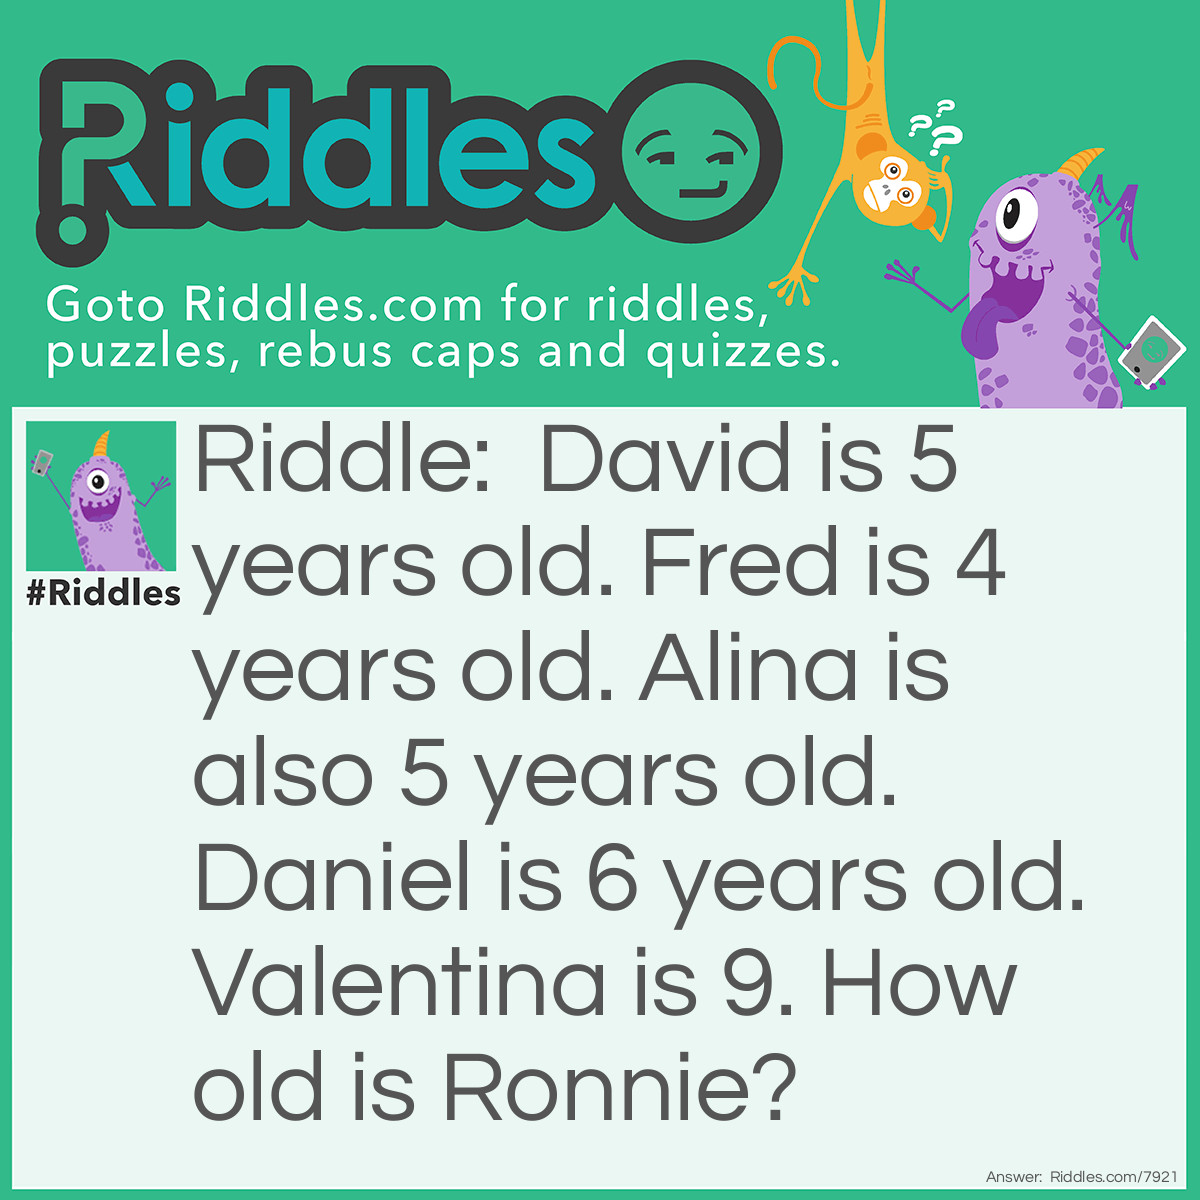 Riddle: David is 5 years old. Fred is 4 years old. Alina is also 5 years old. Daniel is 6 years old. Valentina is 9. How old is Ronnie? Answer: Ronnie is 6 because each person's age is the same as the number of letters in their name.